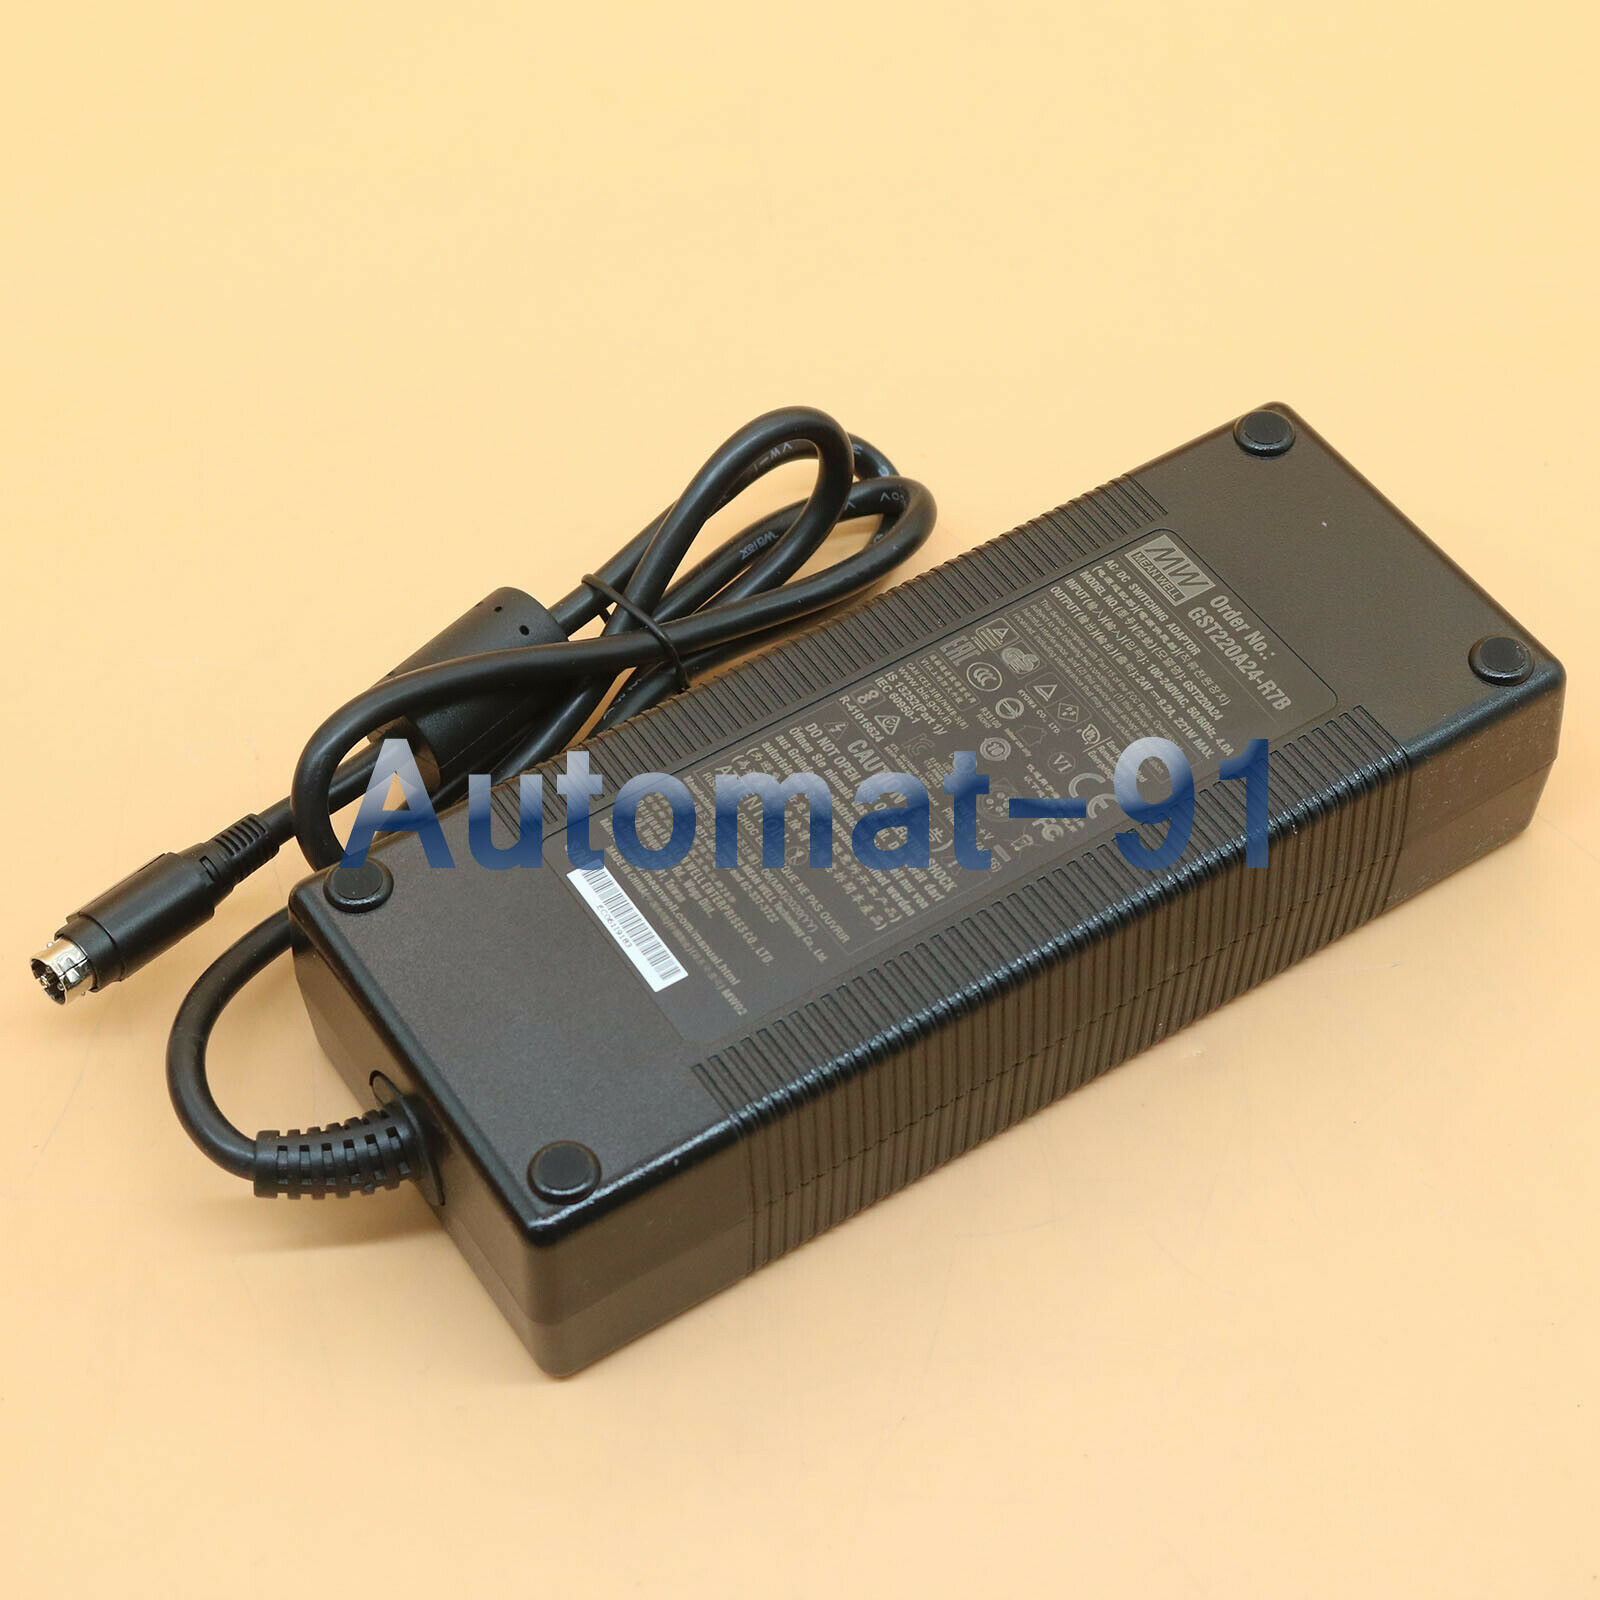 *Brand NEW*Fargo DTC4000 DTC1250e ID Card Printer AC Adapter Power Supply Charger